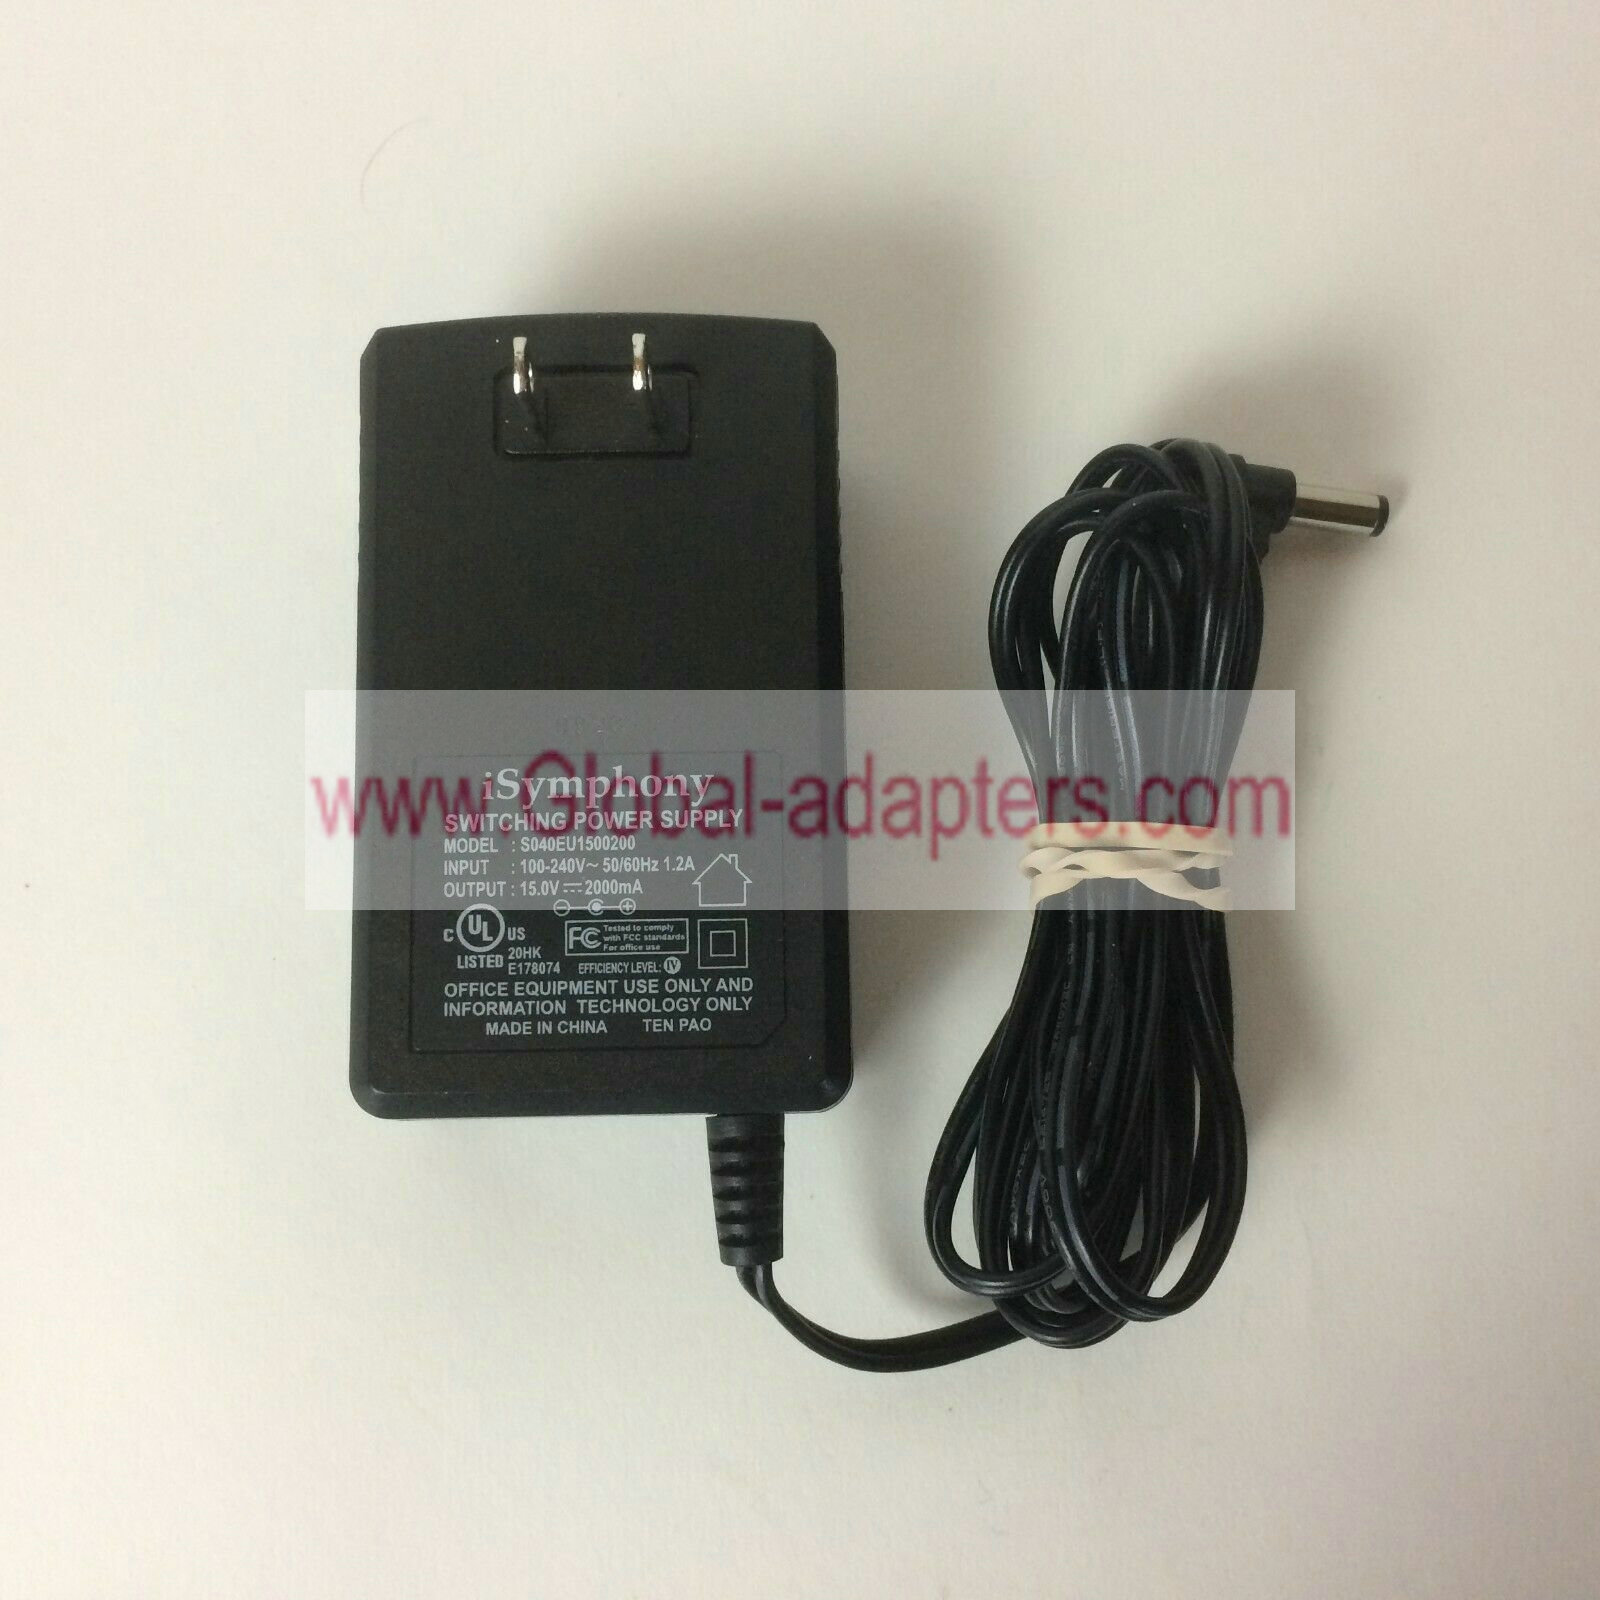 Brand new iSymphony S040EU1500200 Switching Power Supply AC Adapter 15.0V 2000mA - Click Image to Close